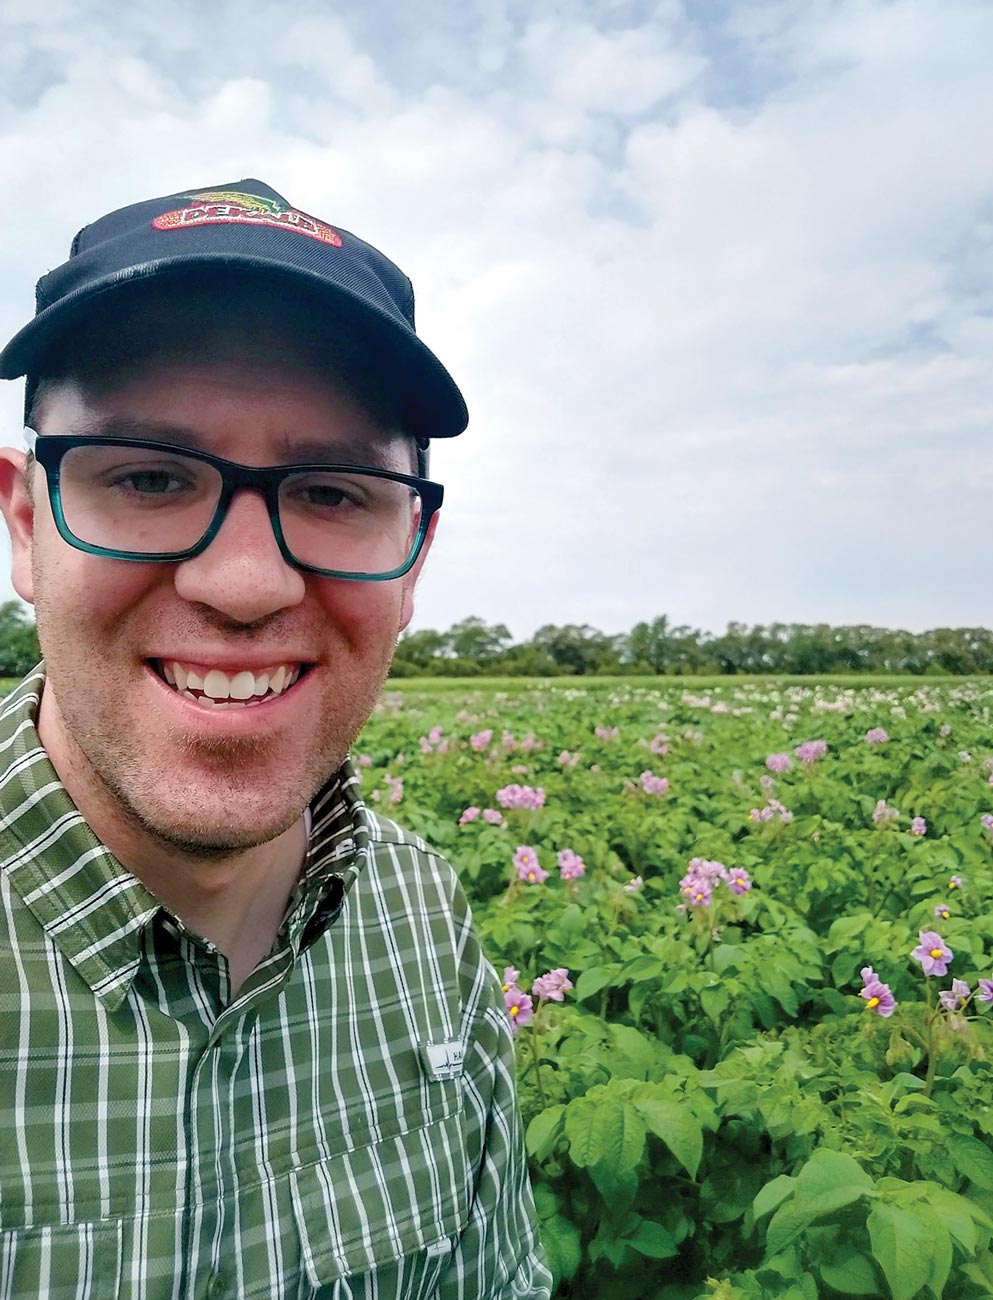 researcher Jed Grow takes a smiling selfie in a field of crops topped with purple flowers